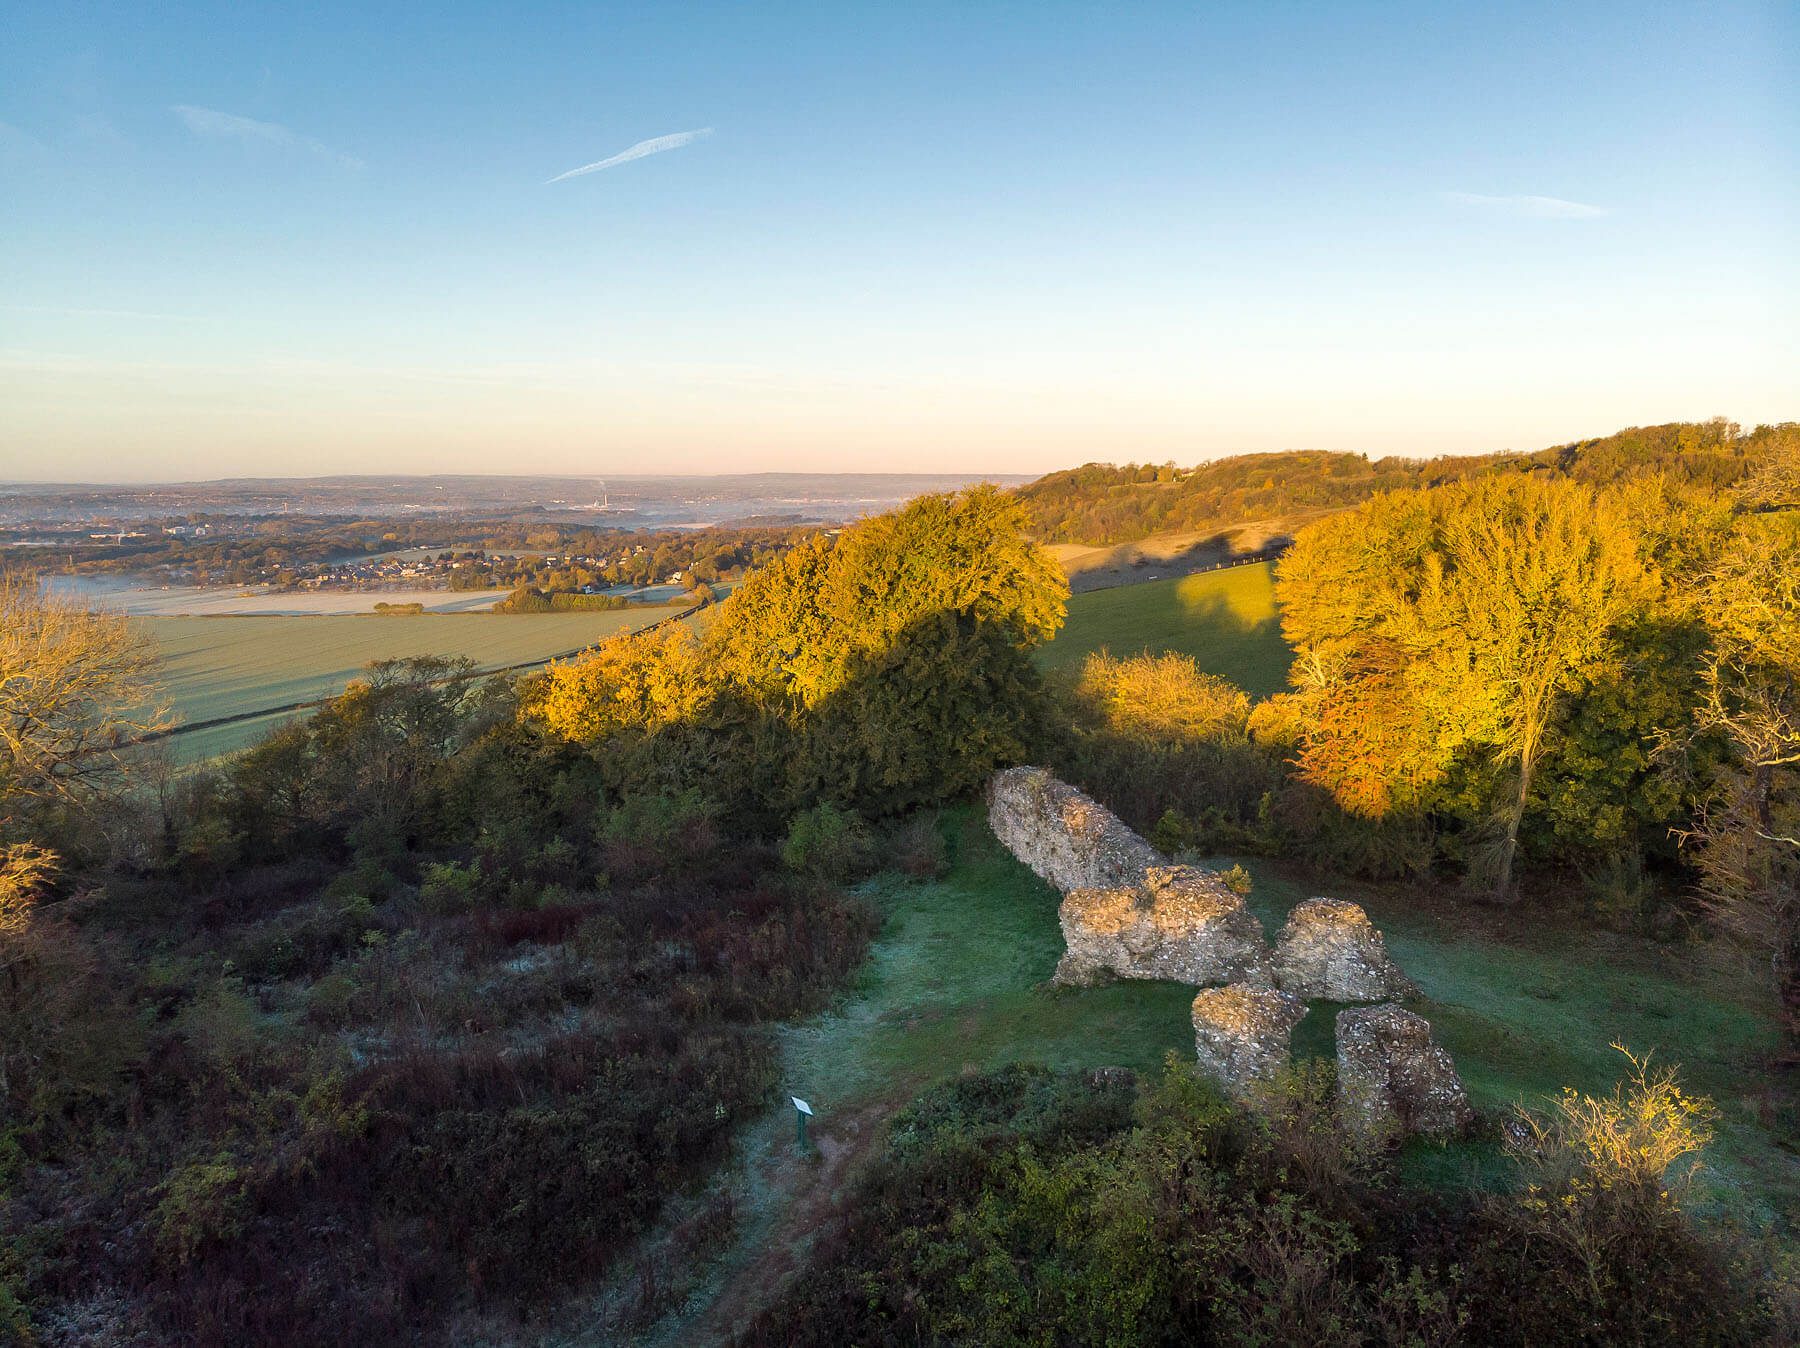 Views across Thurnham Castle ruins, with green and yellow trees on a sunny day.